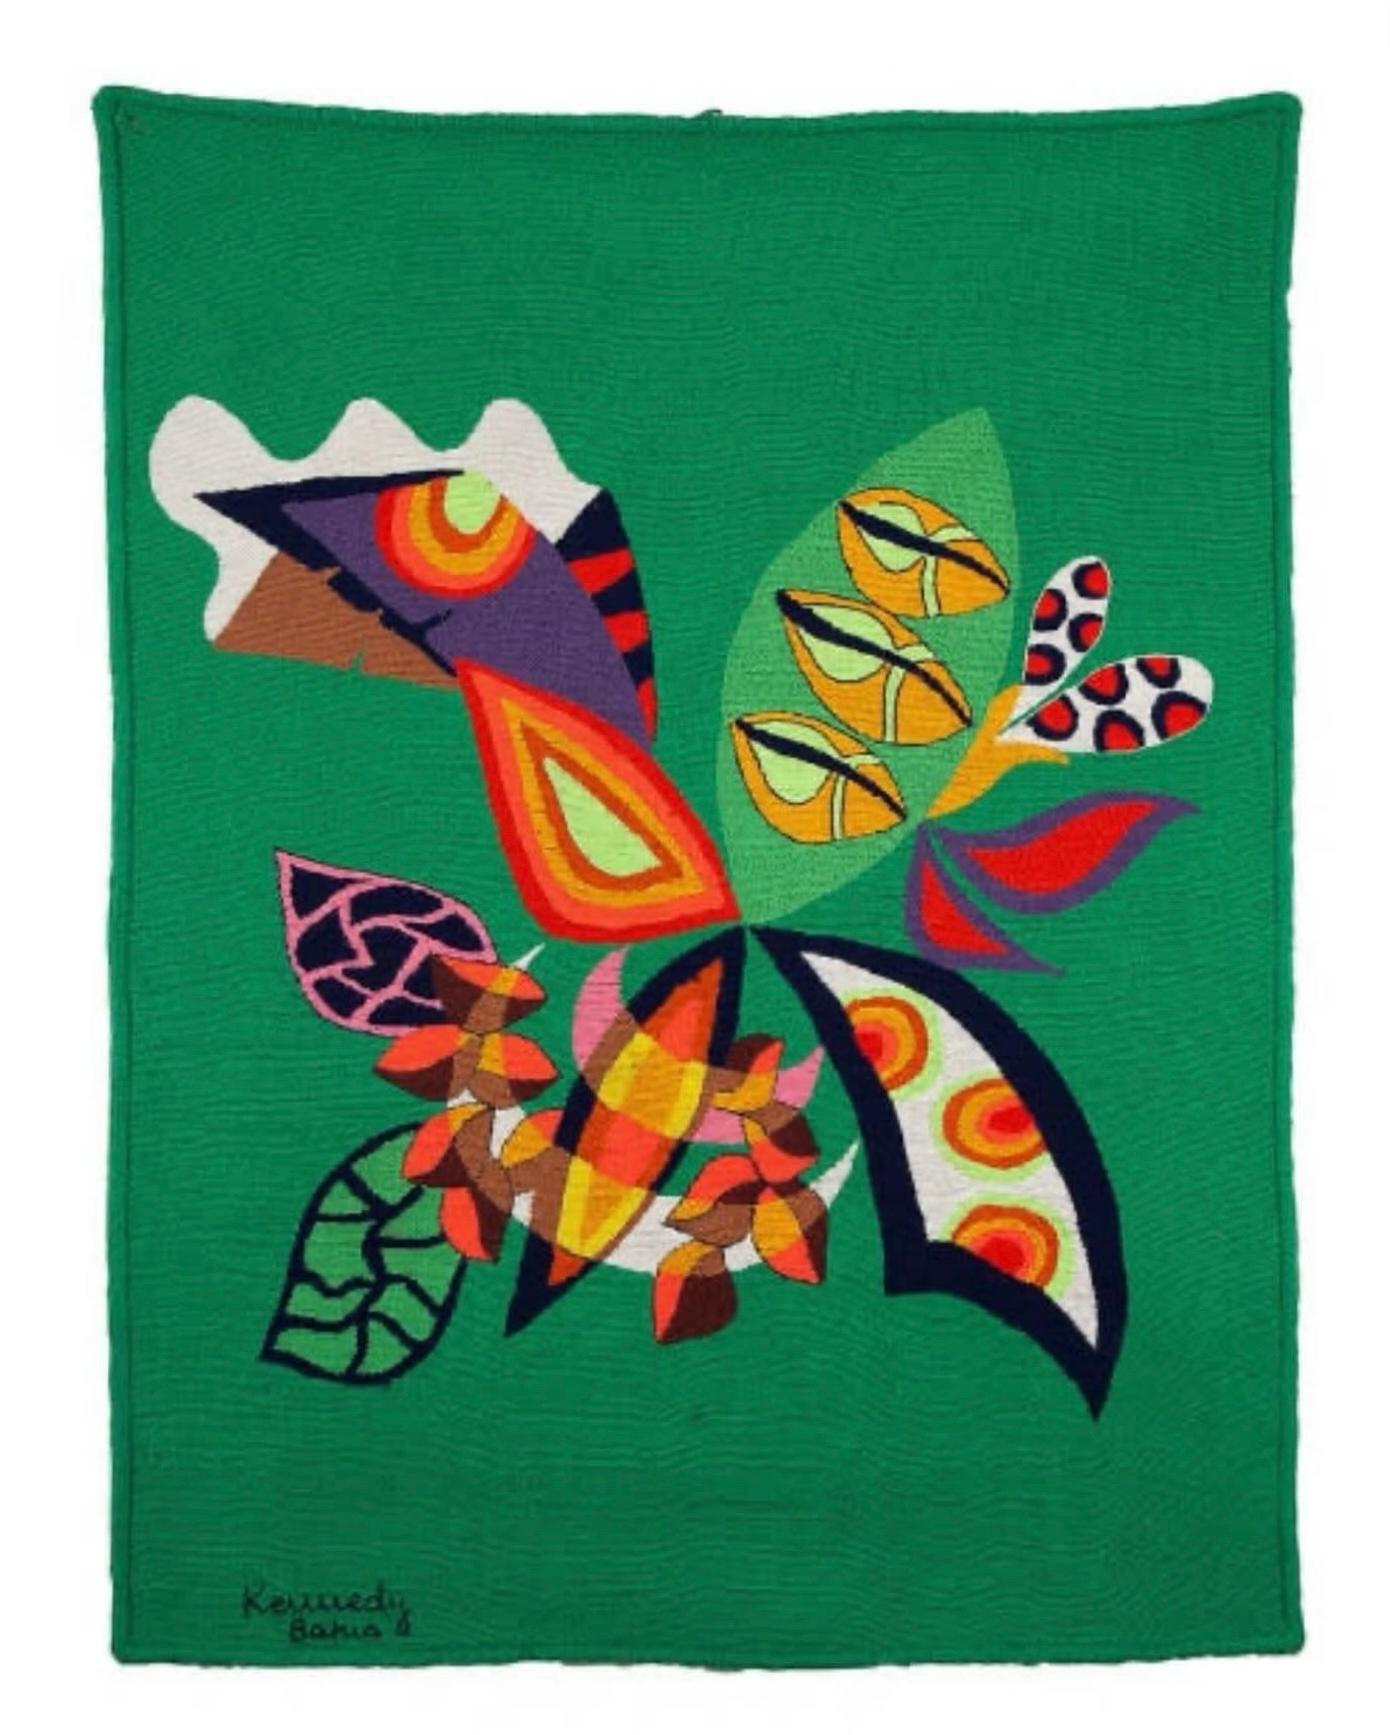 Kennedy Bahia (1929-2005)
Tapisserie polychrome , c. 1960
Signé/ Laine
130 x 100 cm

This tapestry by Kennedy Bahia, dating from the 1960s, is a remarkable work for its composition and motifs. Measuring 130 x 100 cm, it is made of wool and signed by